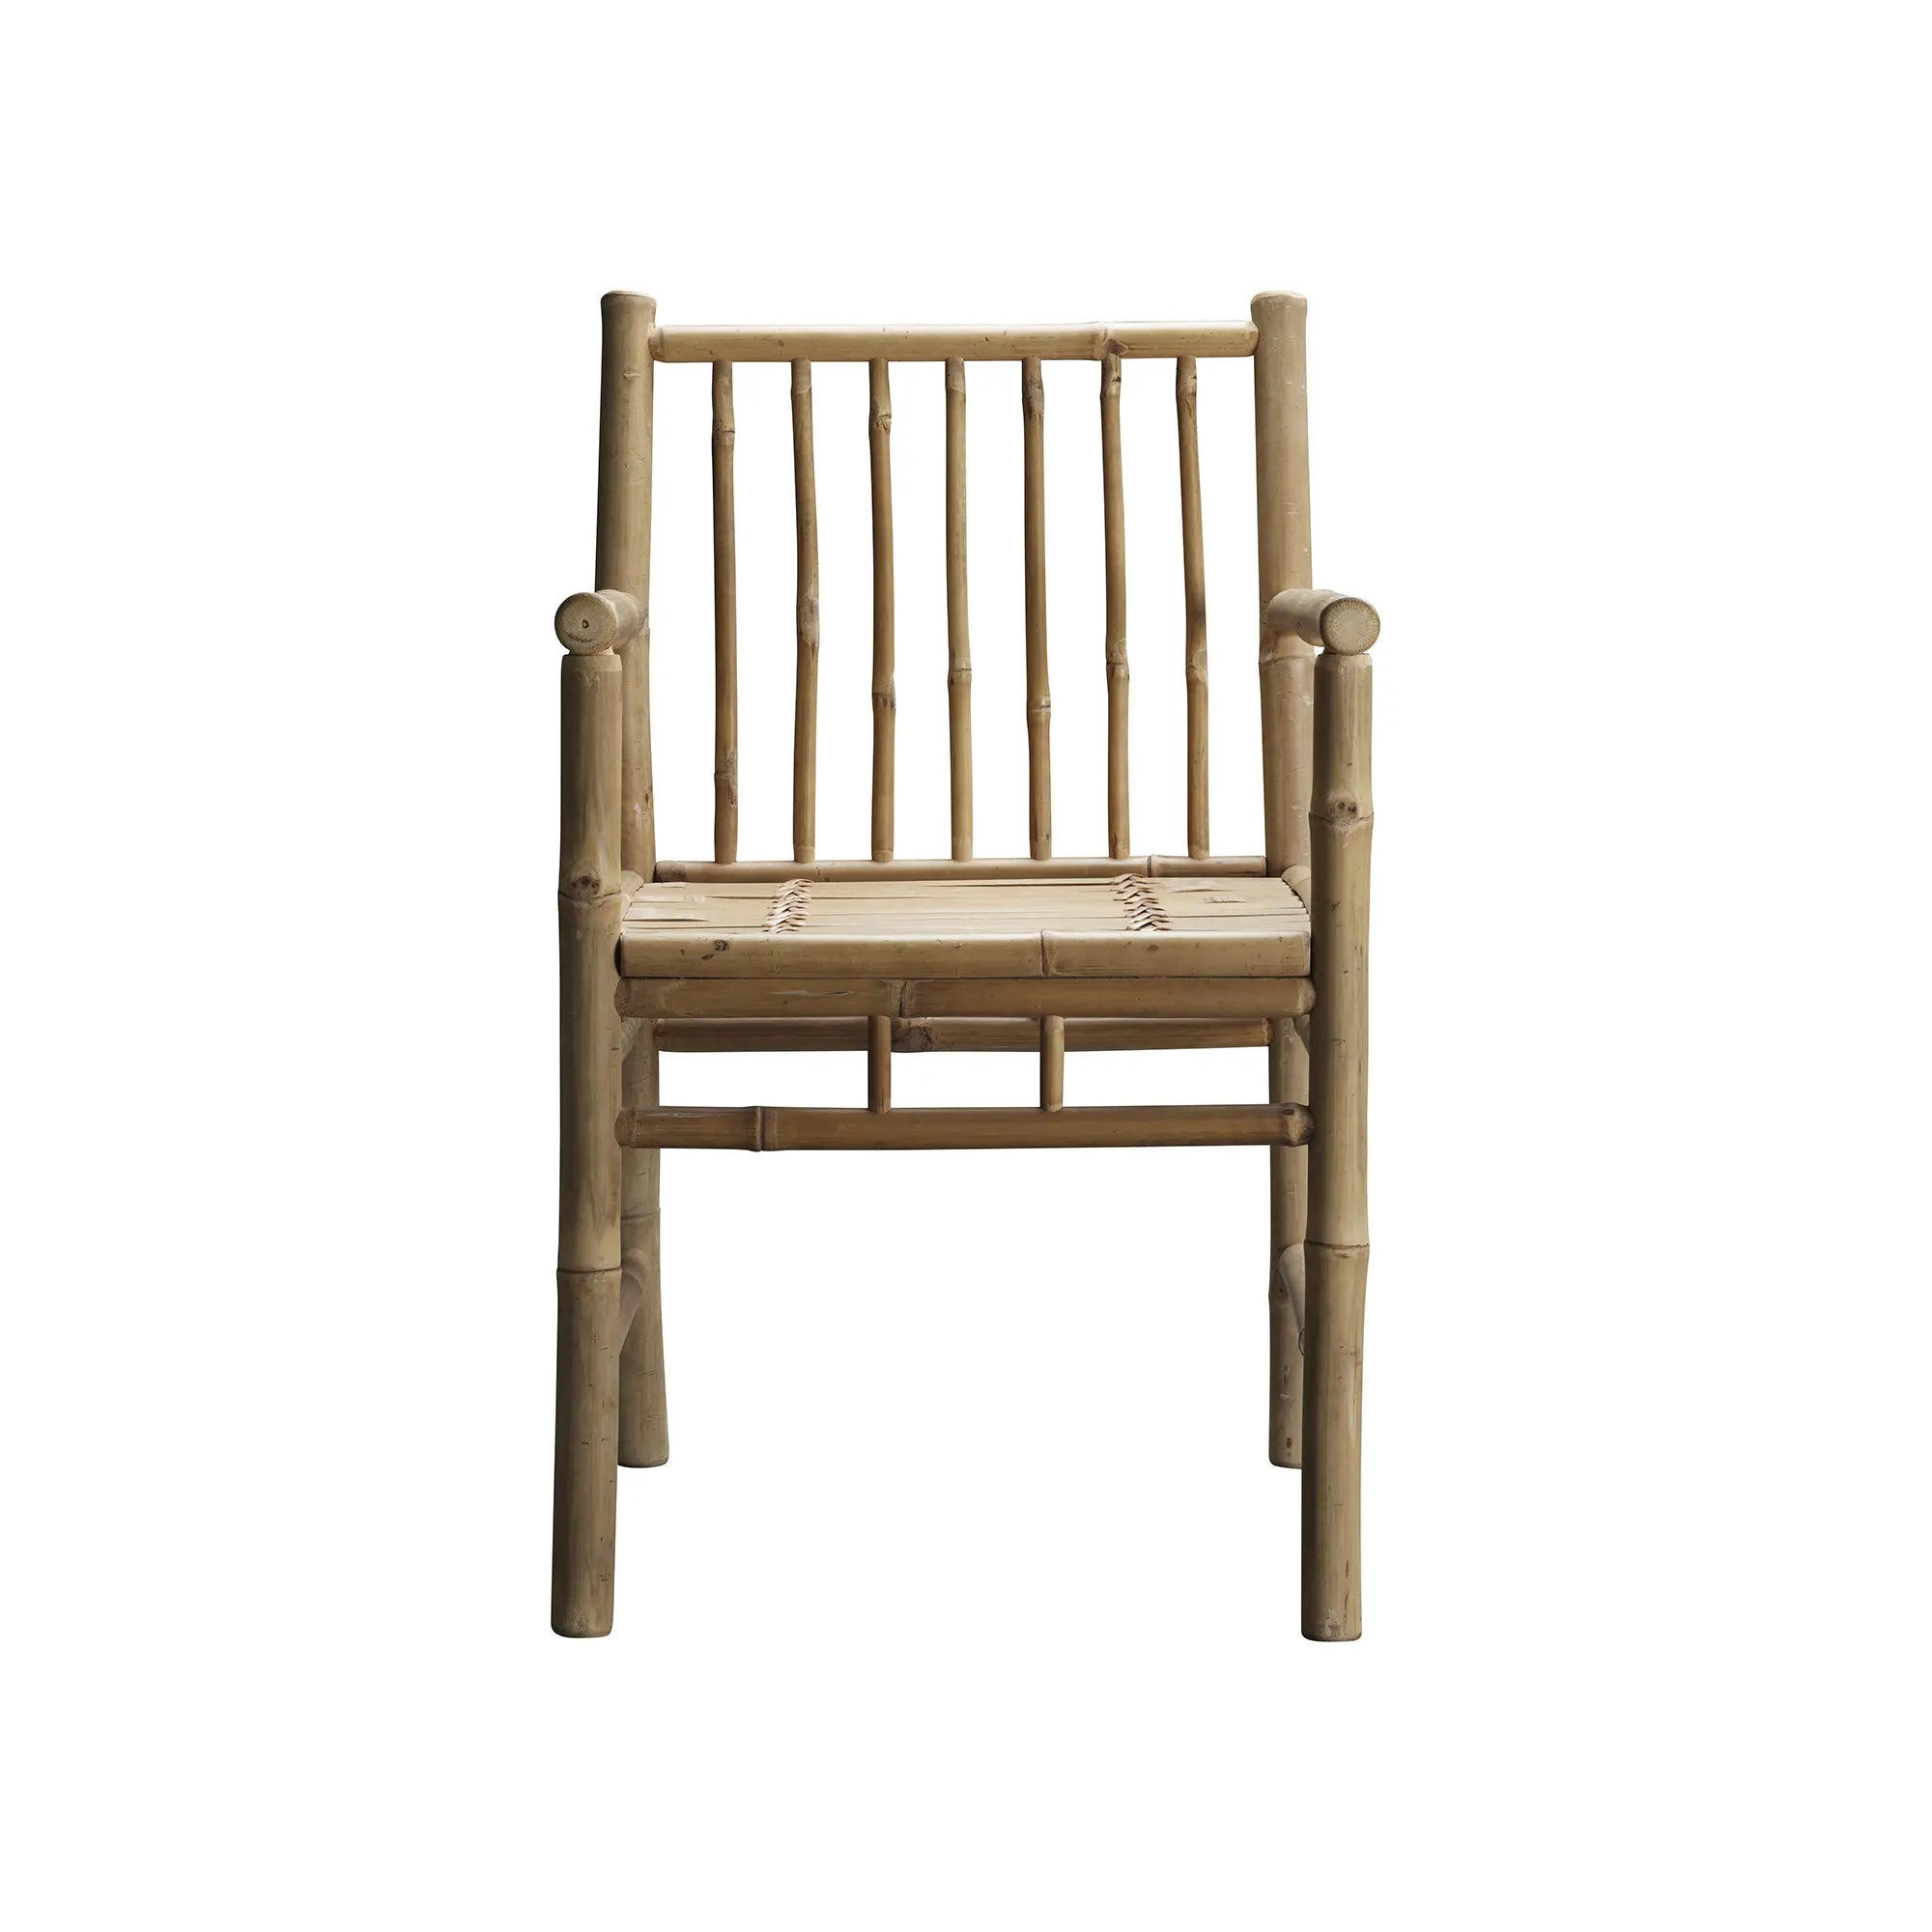 Outdoor Bamboo Dining Chair With Armrest - Set of 4